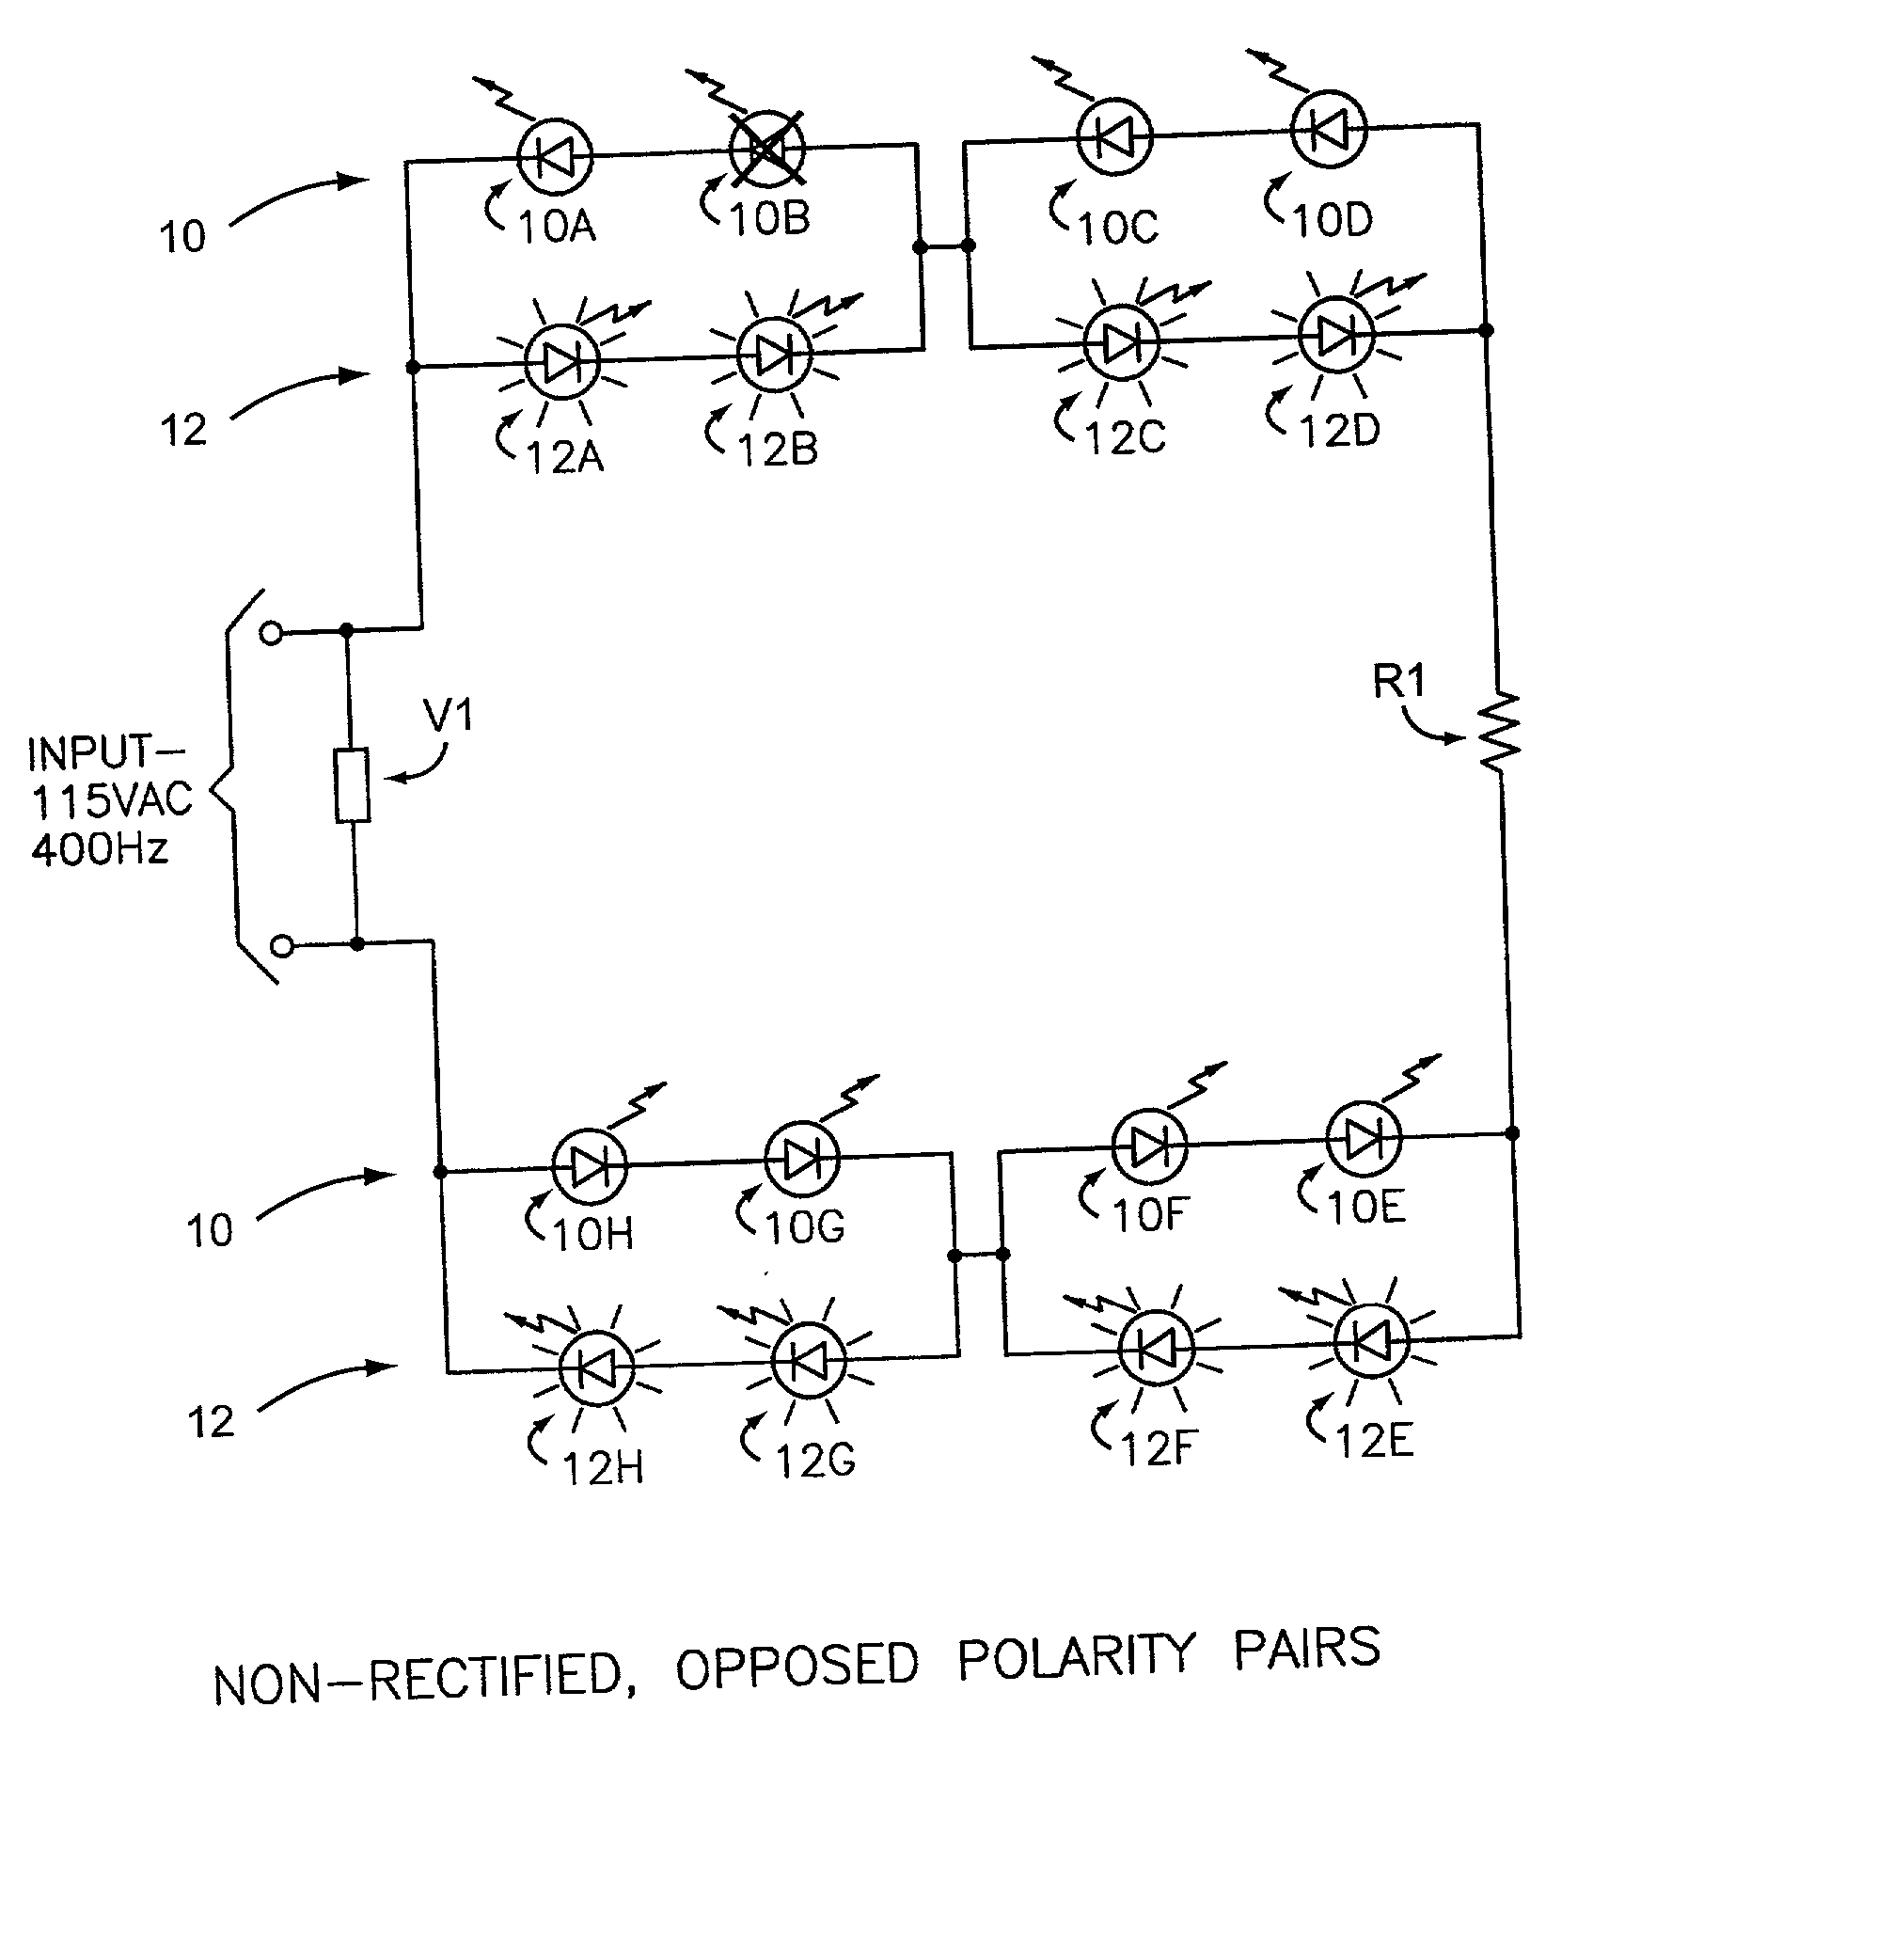 LED array primary display light sources employing dynamically switchable bypass circuitry